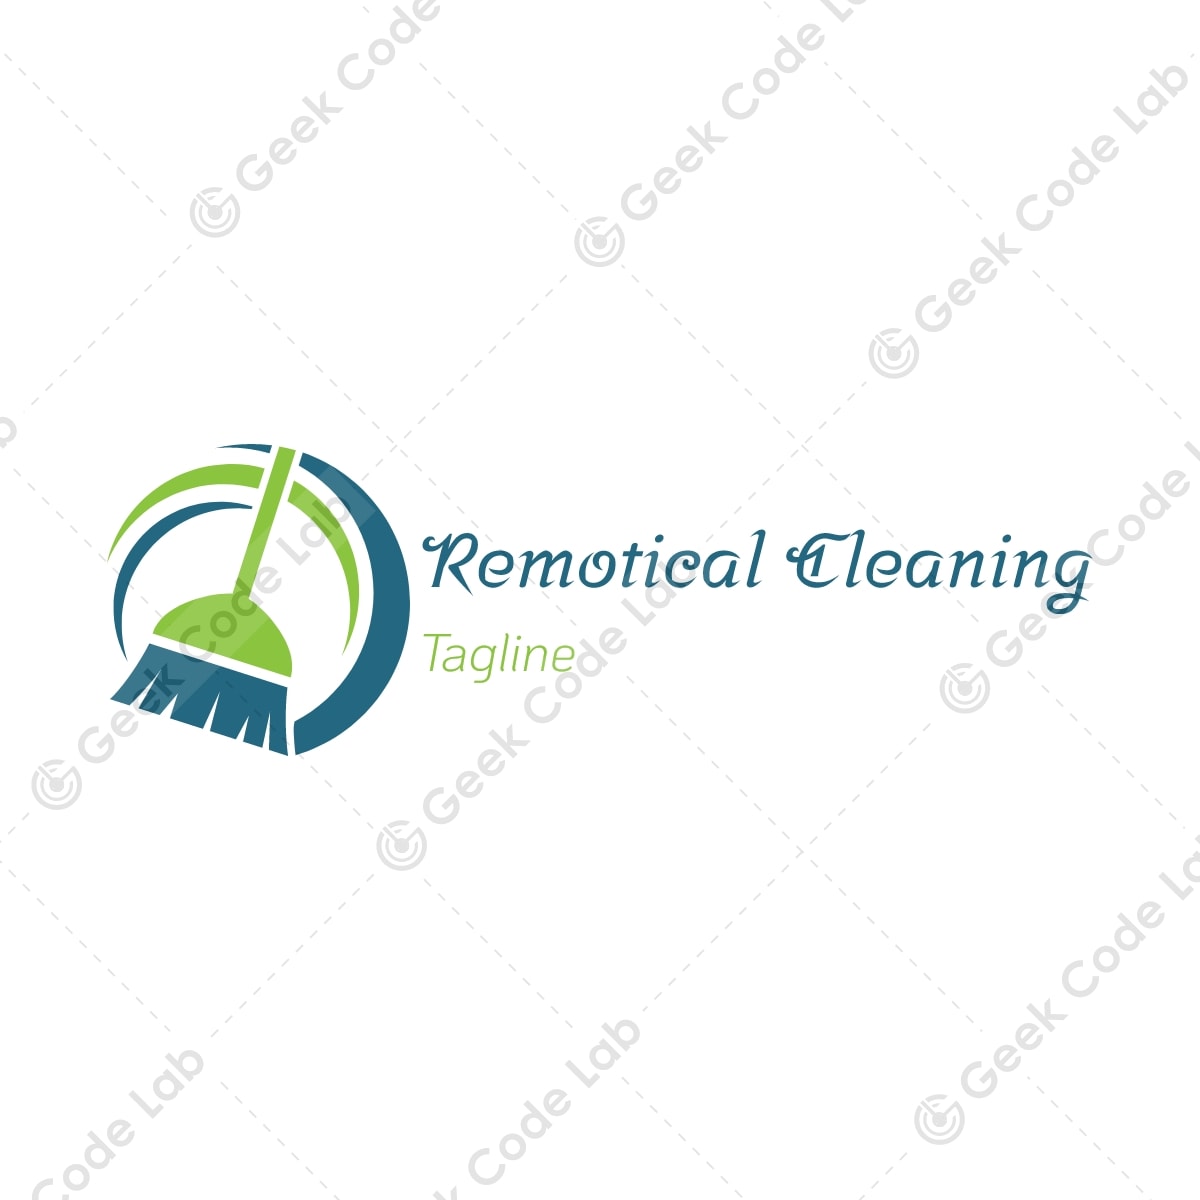 Remotical Cleaning